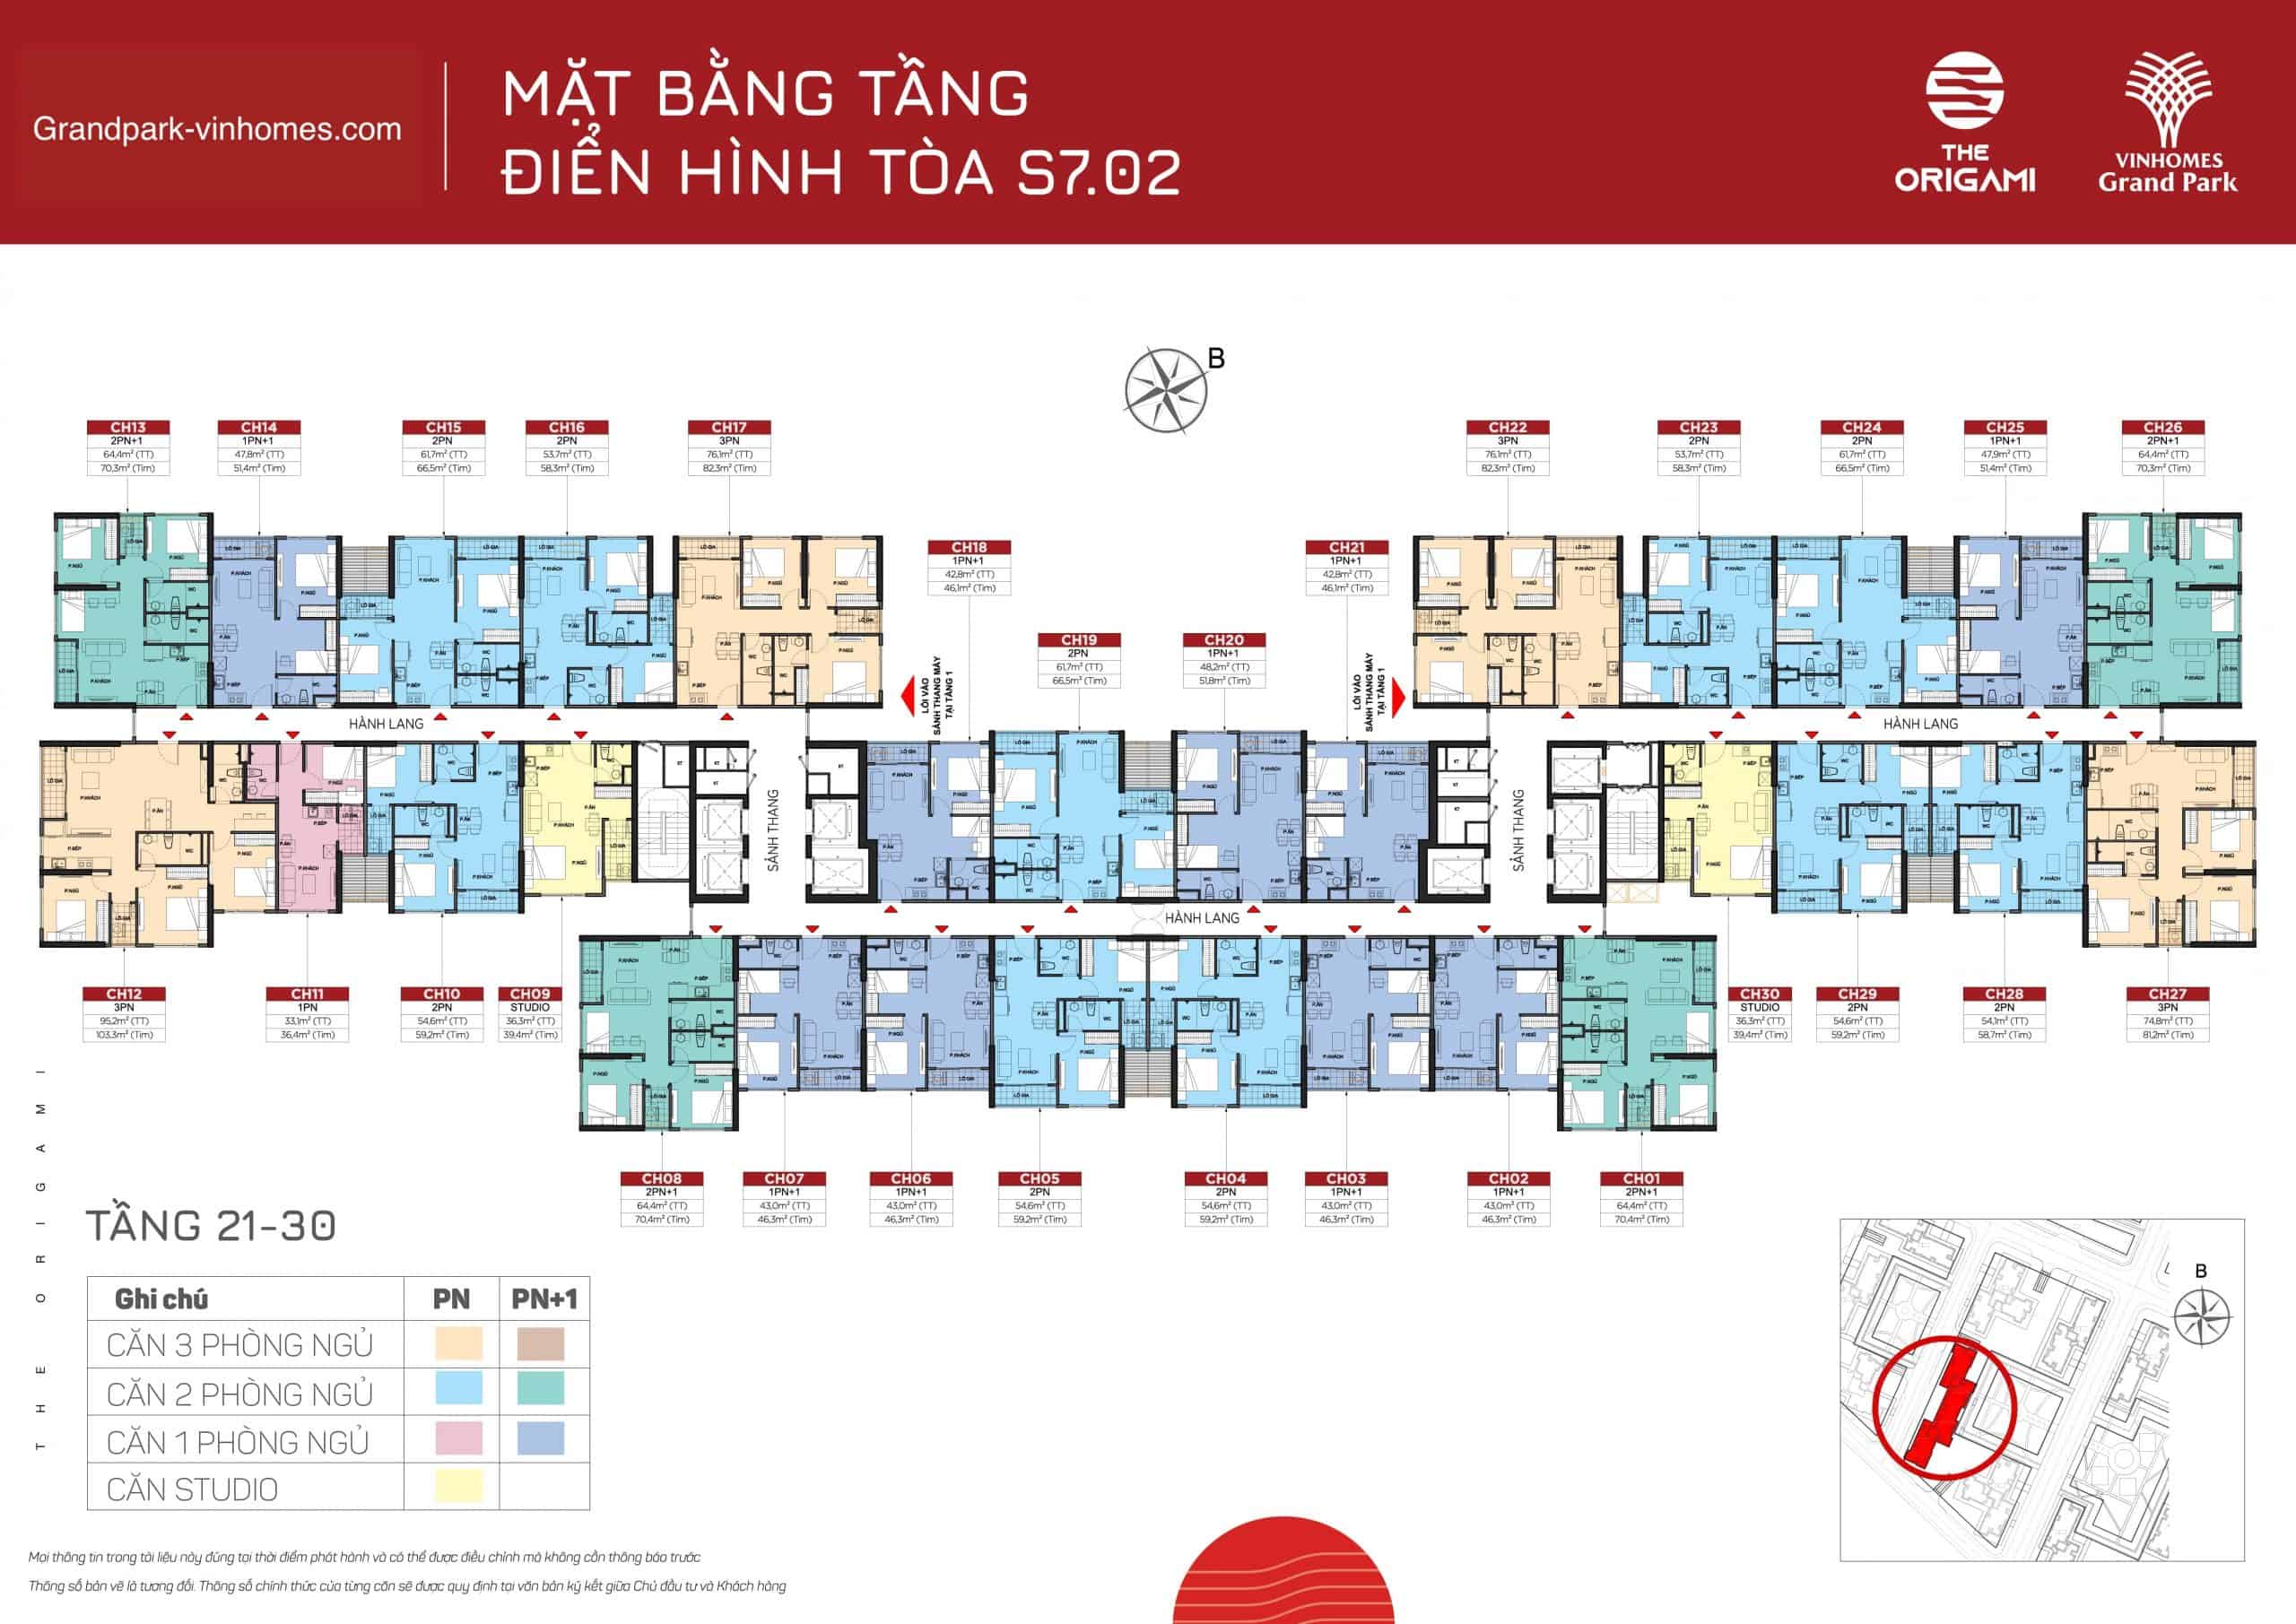 layout tòa s702 tầng 21-30